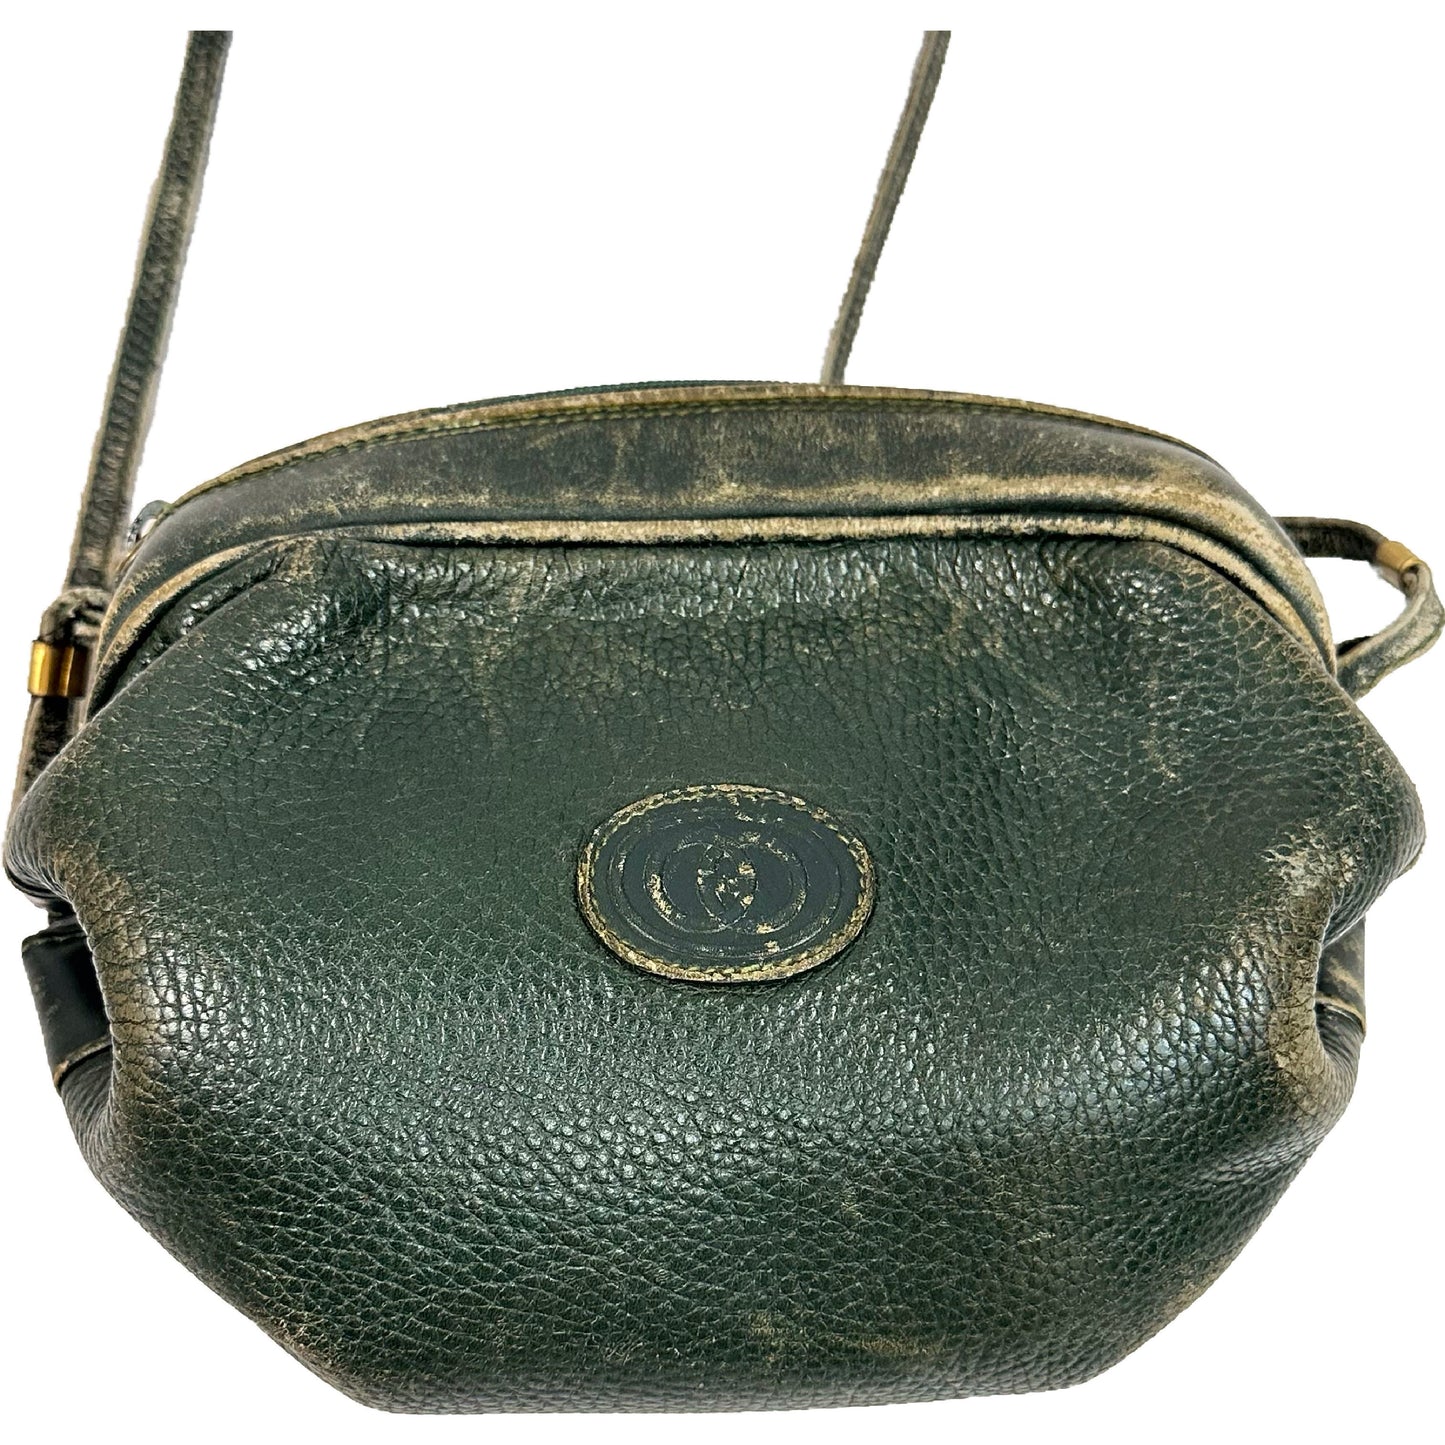 Vintage Gucci 80’s Green Leather Tootsie Roll Cinch Barrel Bag